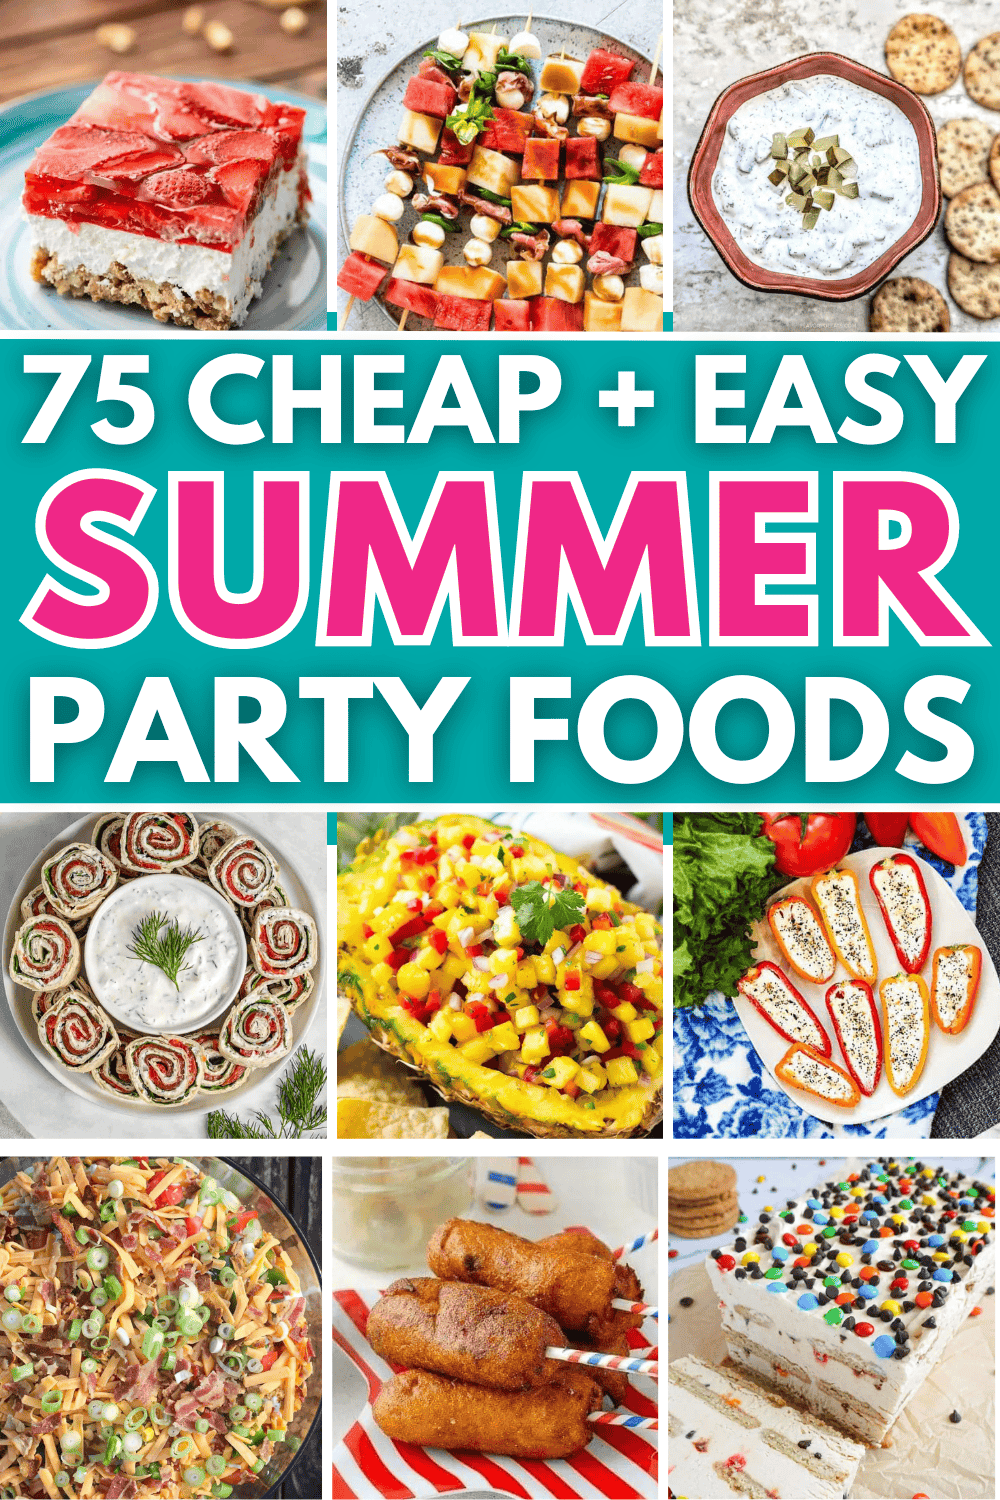 Easy summer party food for a crowd! These cheap summer party food ideas include fun summer appetizers, make ahead desserts, finger foods and bbq side dishes. Outdoor summer party food ideas, backyard bbq party food ideas, summer pool party food ideas, summer party recipes for a crowd, outdoor summer party food ideas backyard bbq, menu for summer party food ideas, summer dinner party menu ideas food, summer barbeque party food fun, summer snacks for party simple, backyard dinner party food ideas.